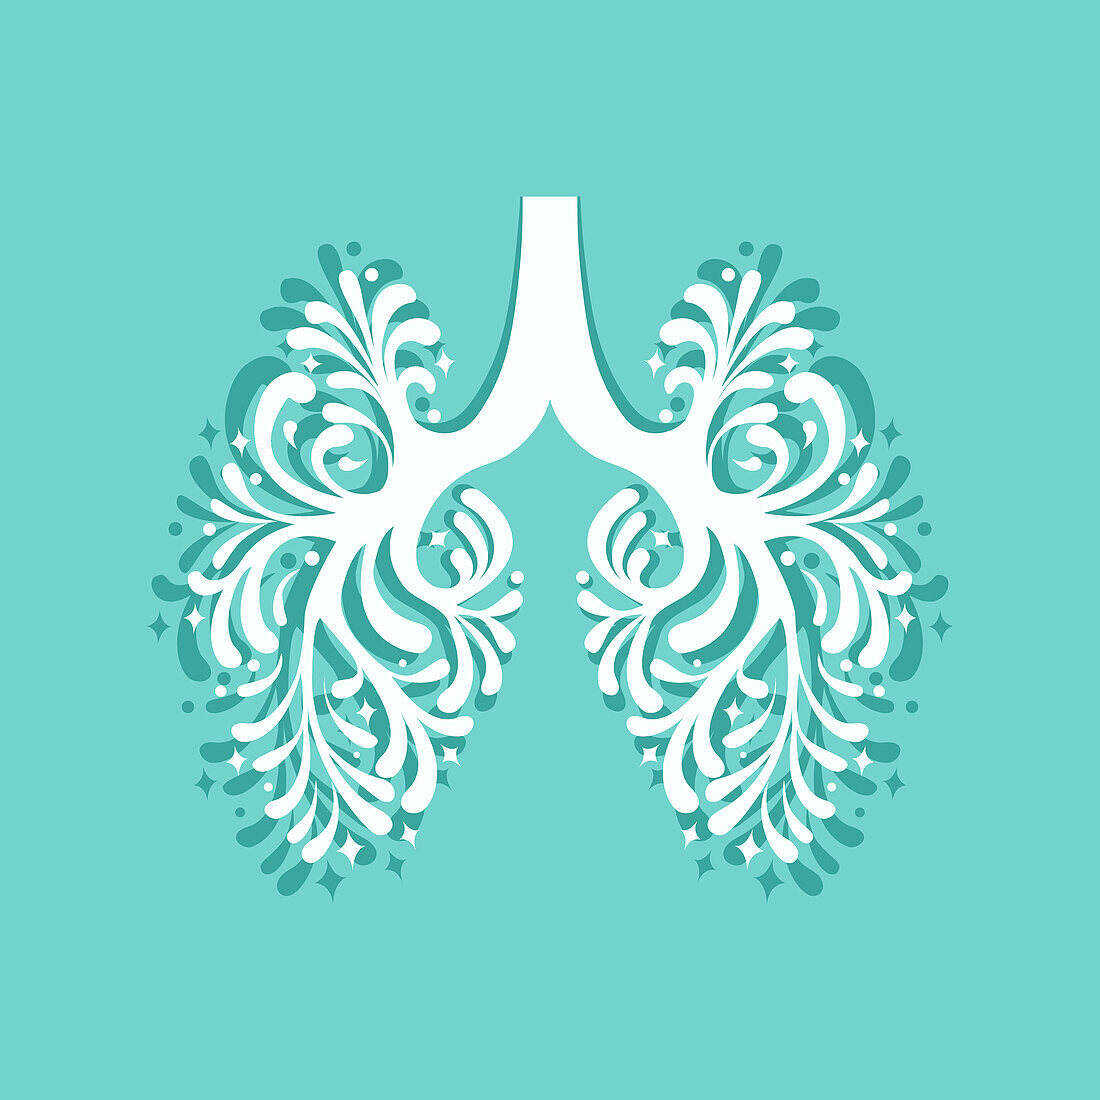 Lungs, conceptual illustration